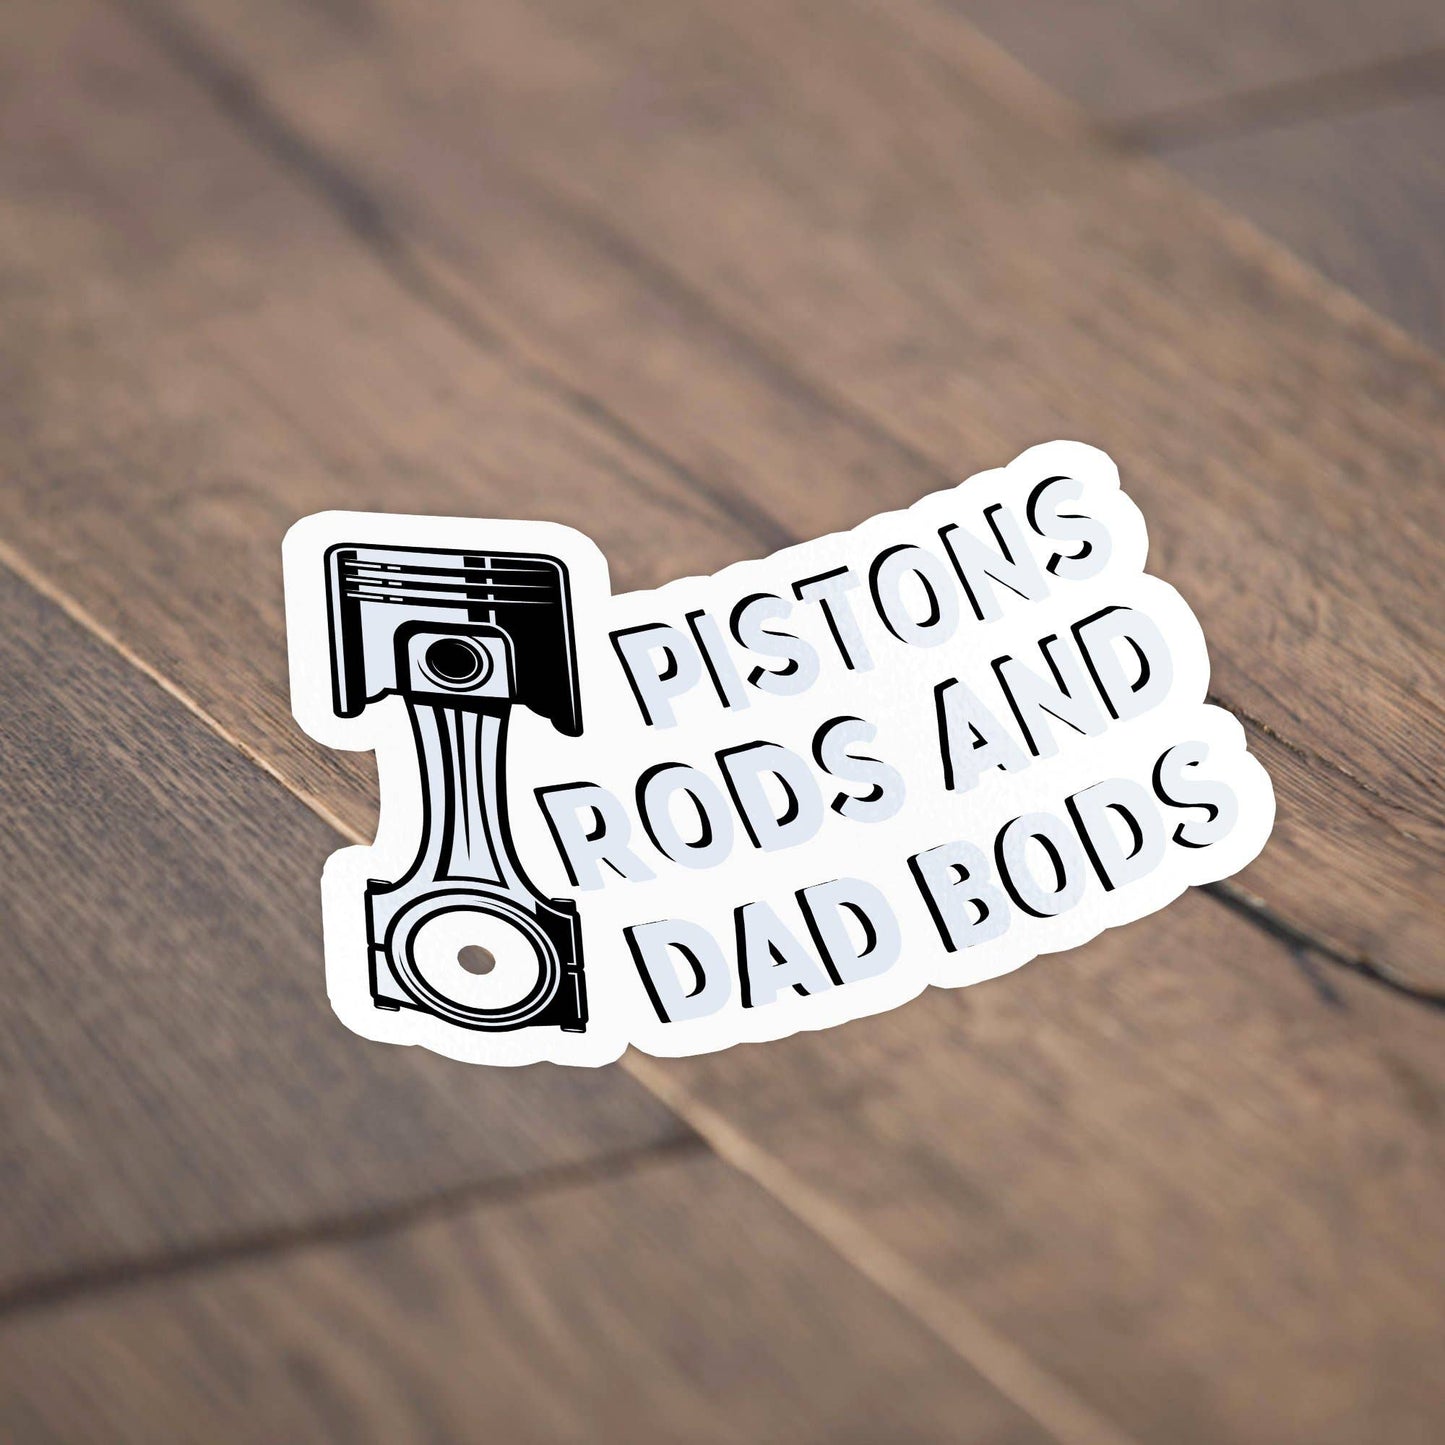 Pistons Rods And Dad Bods Funny Sticker